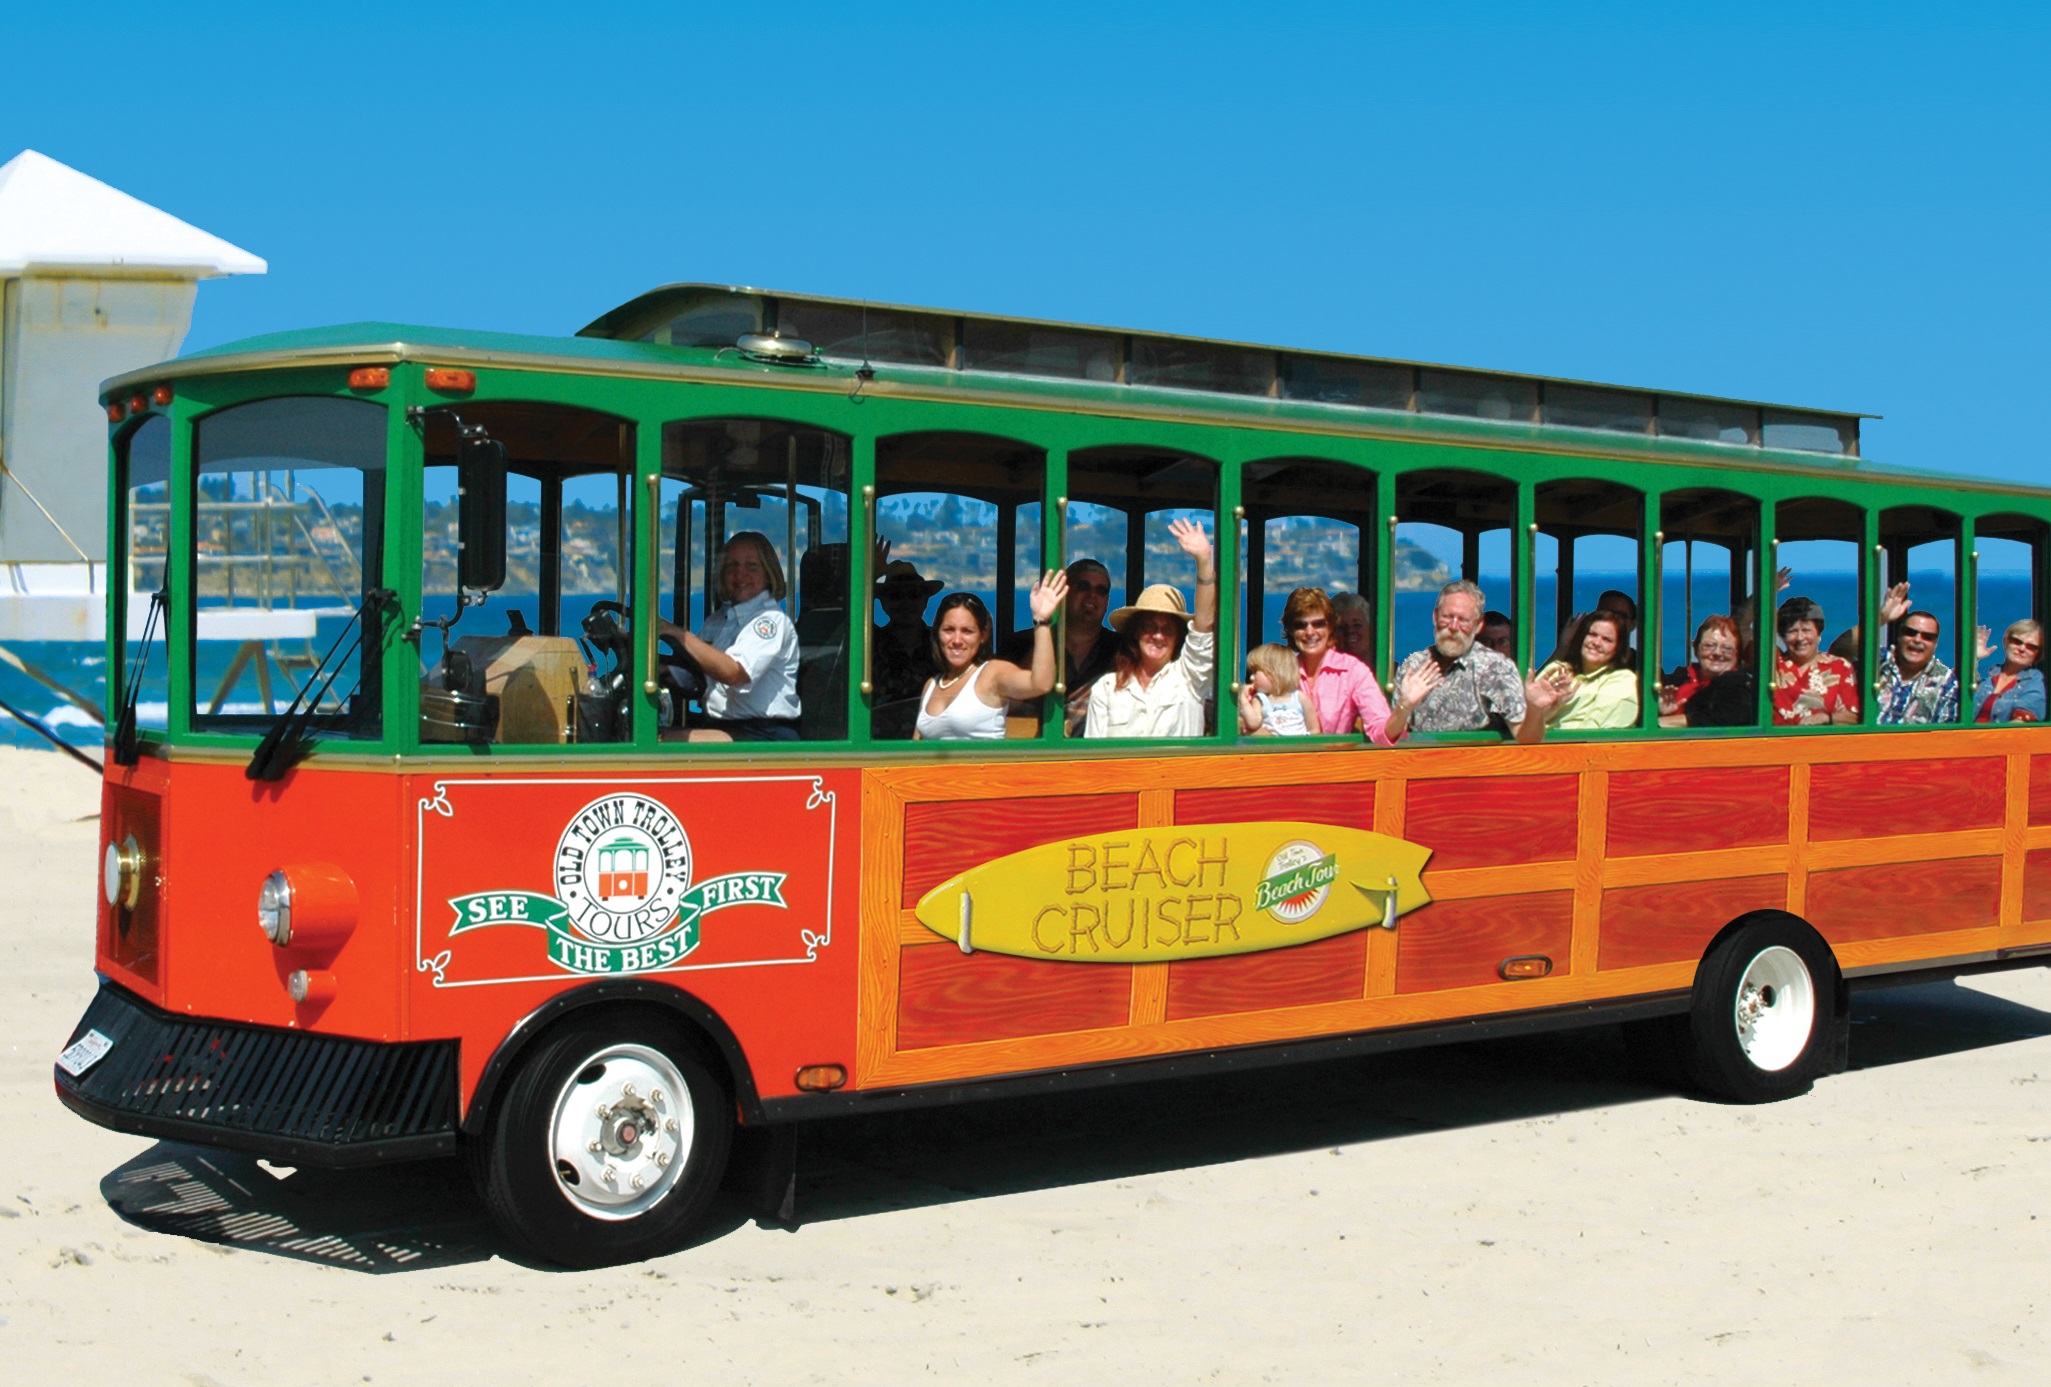 old town trolley tours.com